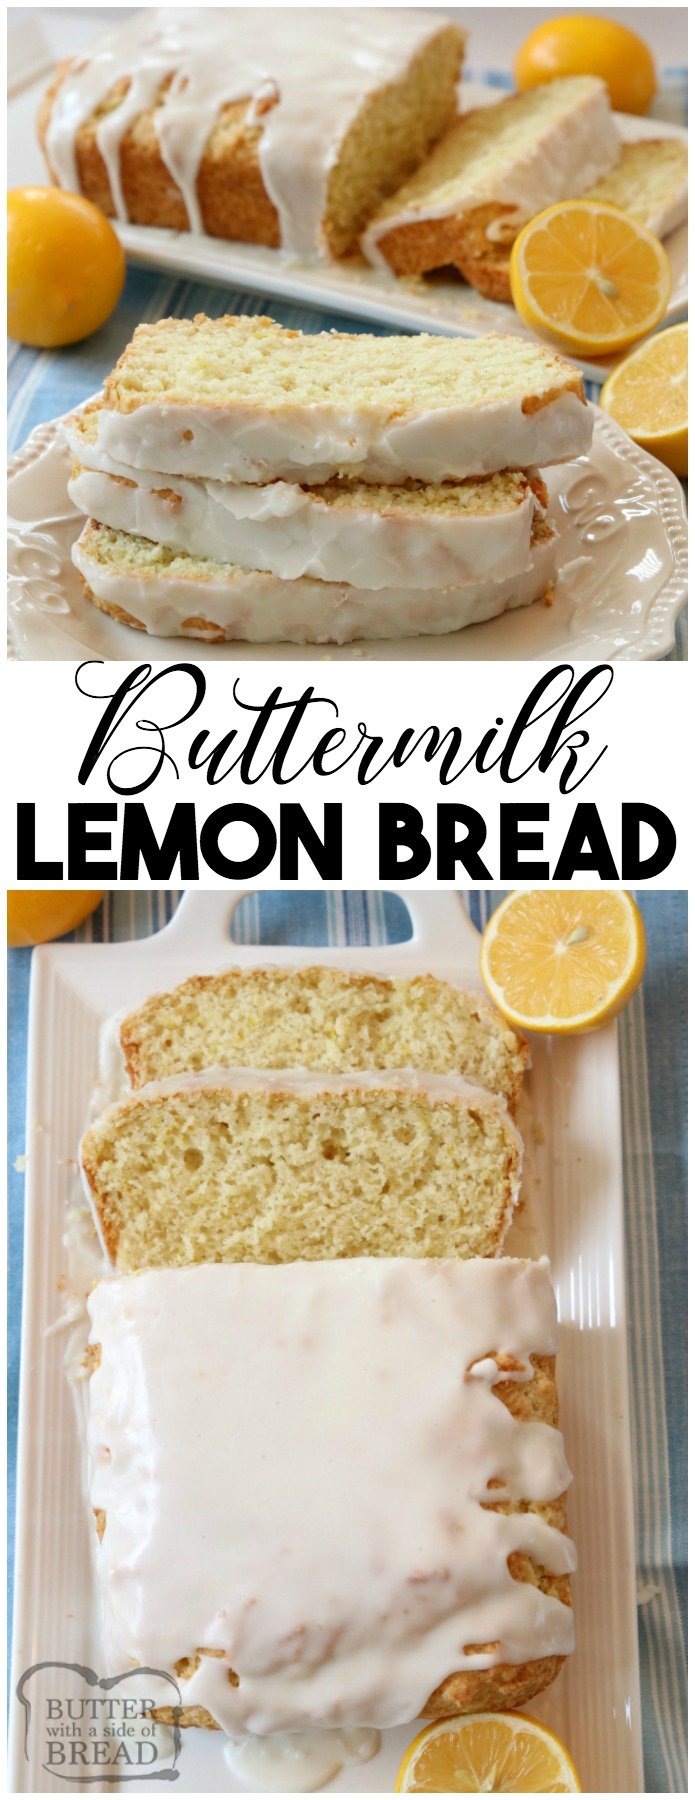 Lemon Buttermilk Bread recipe made with simple ingredients and topped with a bright, fresh lemon glaze. Buttermilk adds a wonderful flavor and texture to this easy lemon bread recipe. Sweet quick bread for anyone who loves baking with lemon! #Lemon #Buttermilk #Bread from Butter With A Side of Bread #quickbread #baking #lemonrecipe #food #easybread